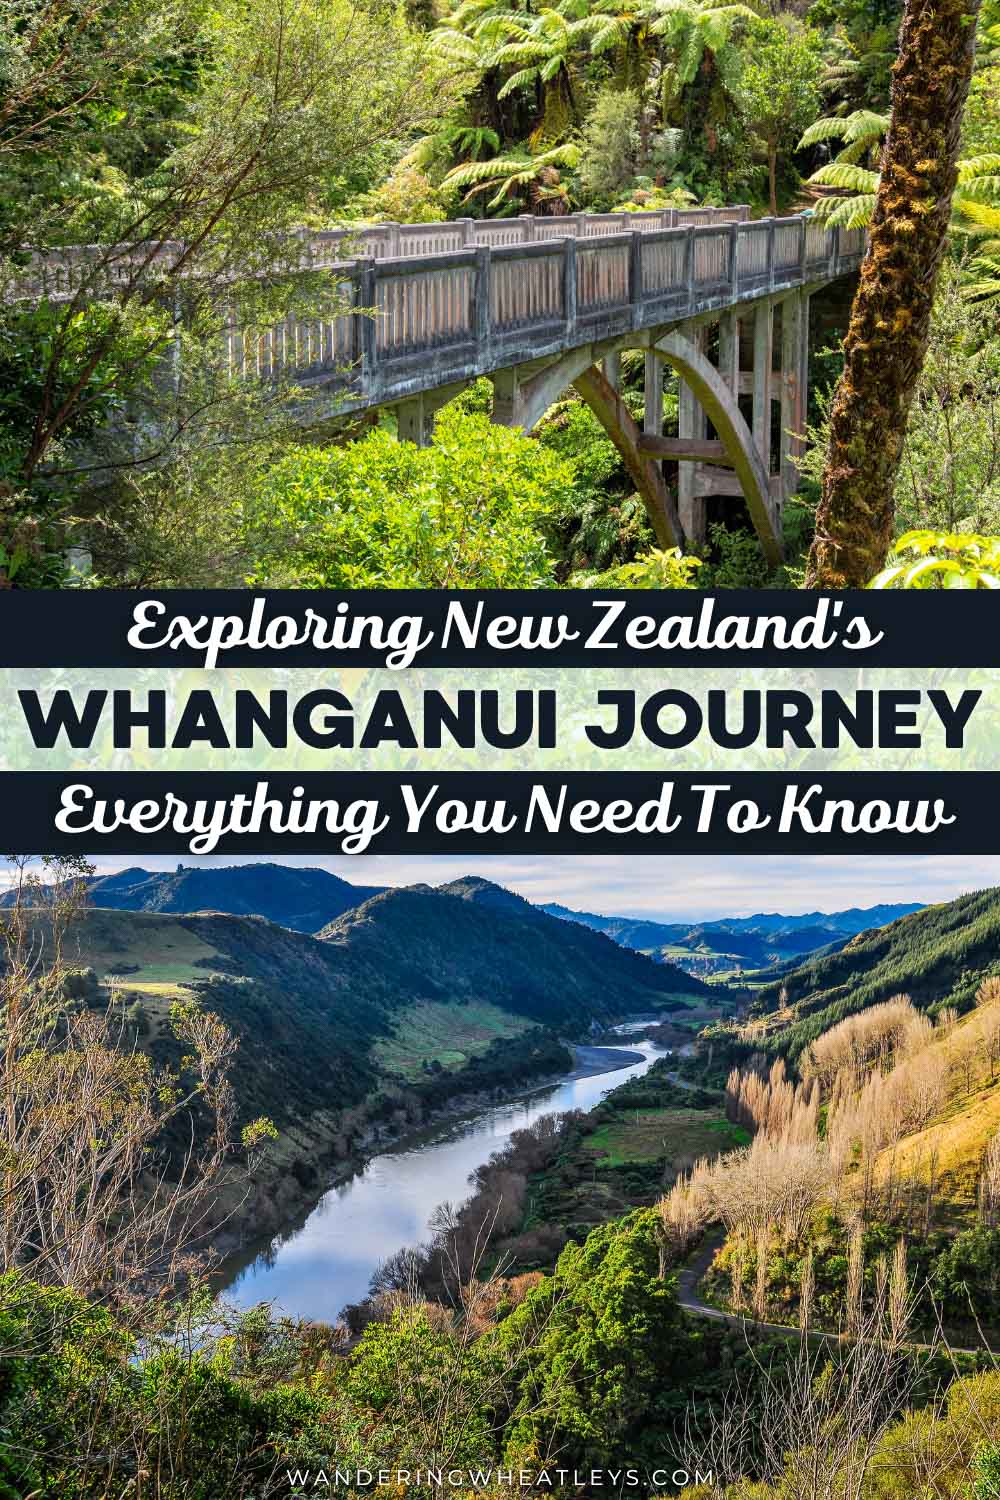 Guide to the Whanganui Journey, New Zealand